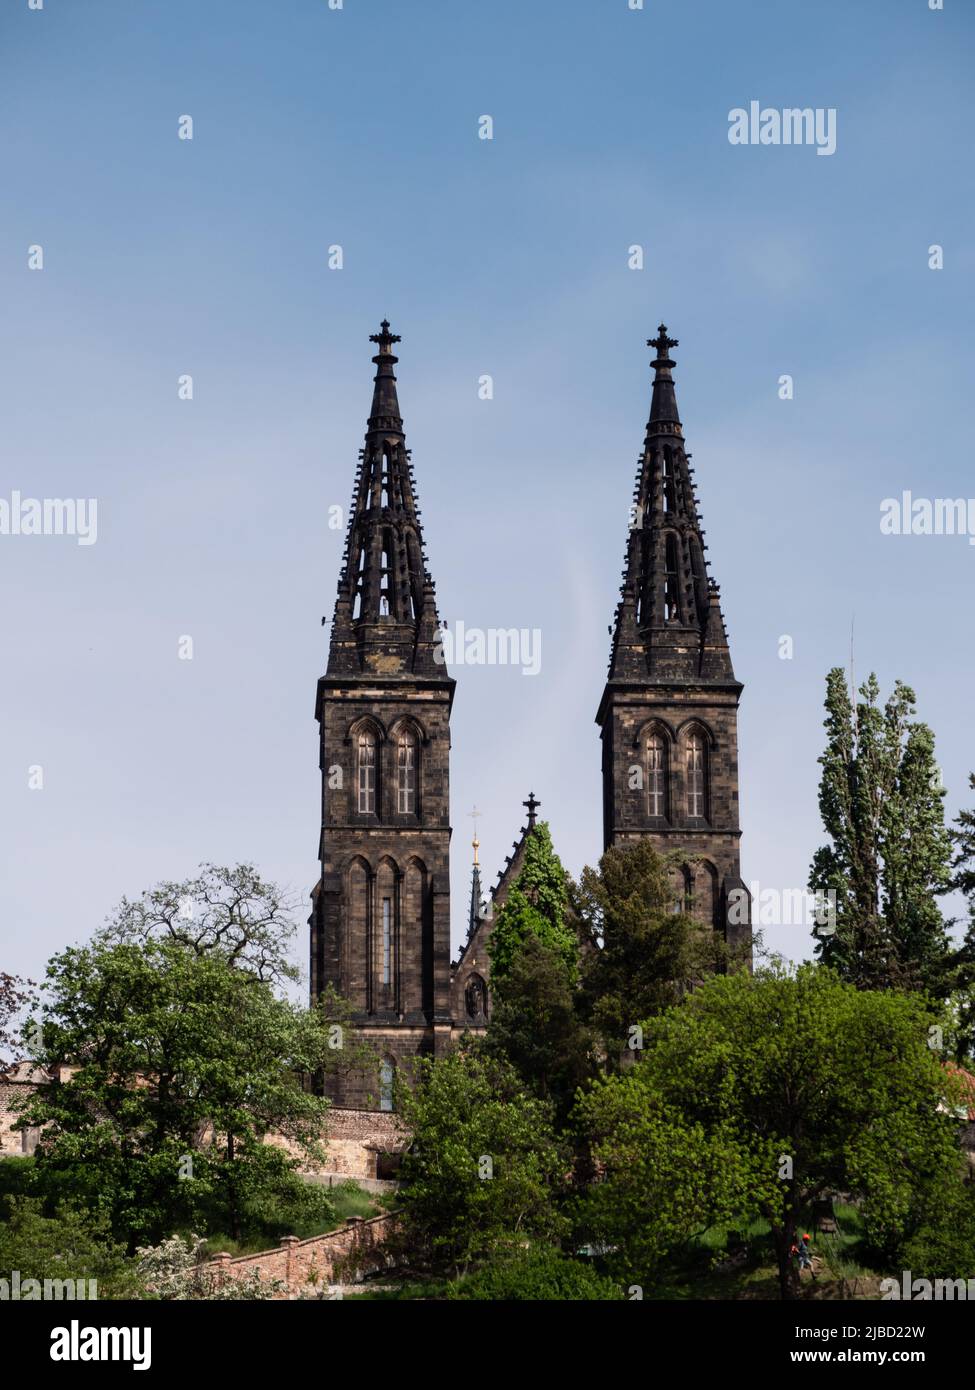 Basilica of St. Peter and St. Paul or Bazilika svatého Petra a Pavla, a neo-Gothic church in Vysehrad fortress in Prague, Czech Republic Stock Photo